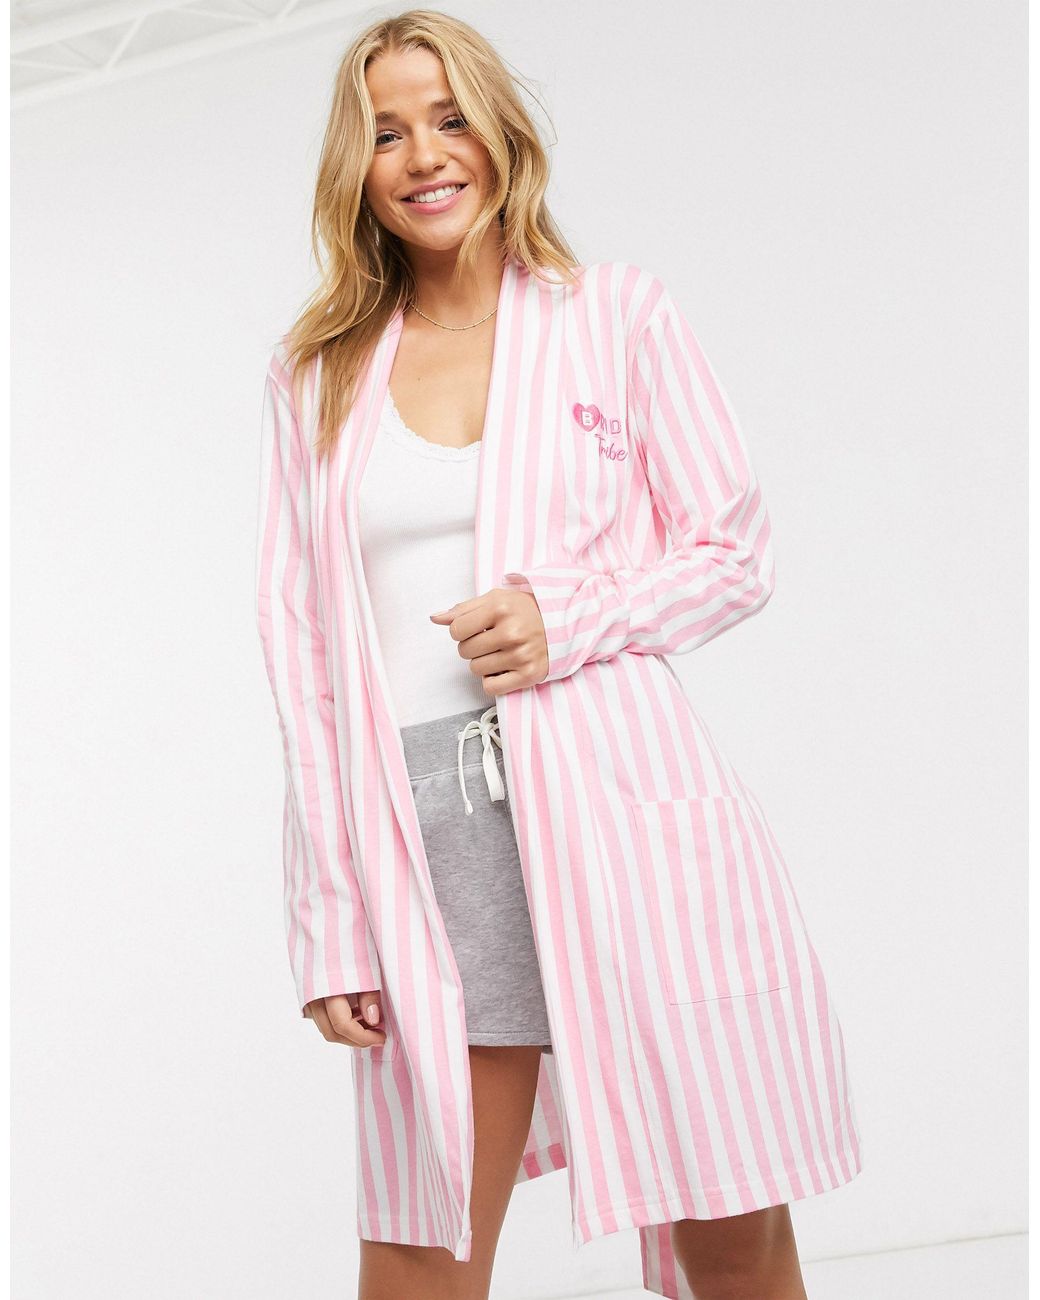 bride tribe dressing gown